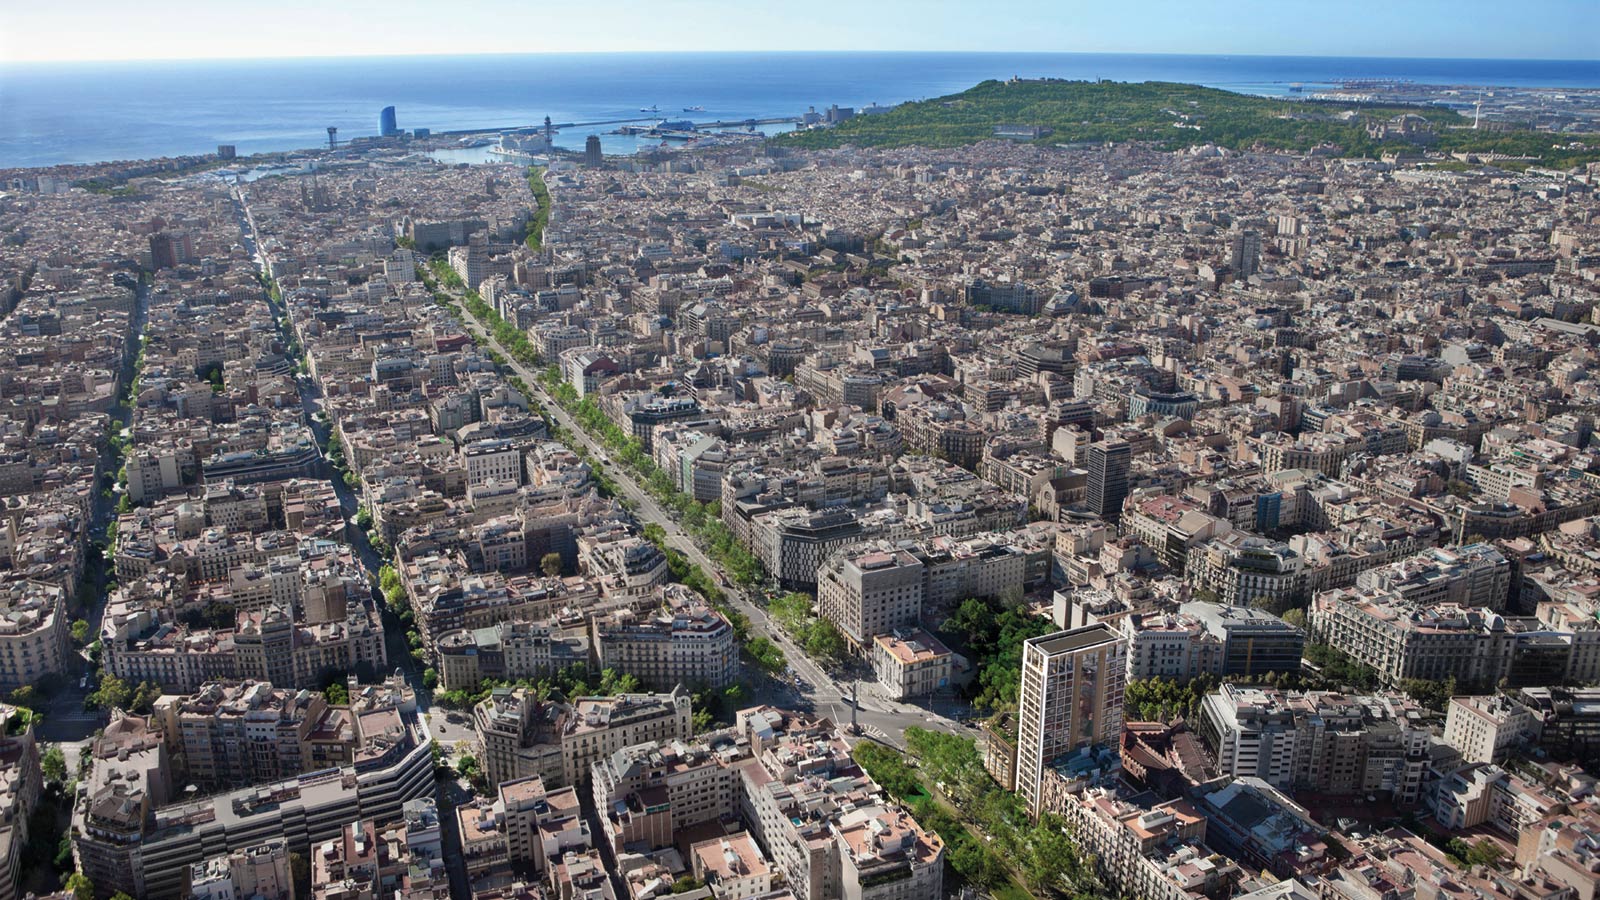 Computer enhanced image of Barcelona – aerial view